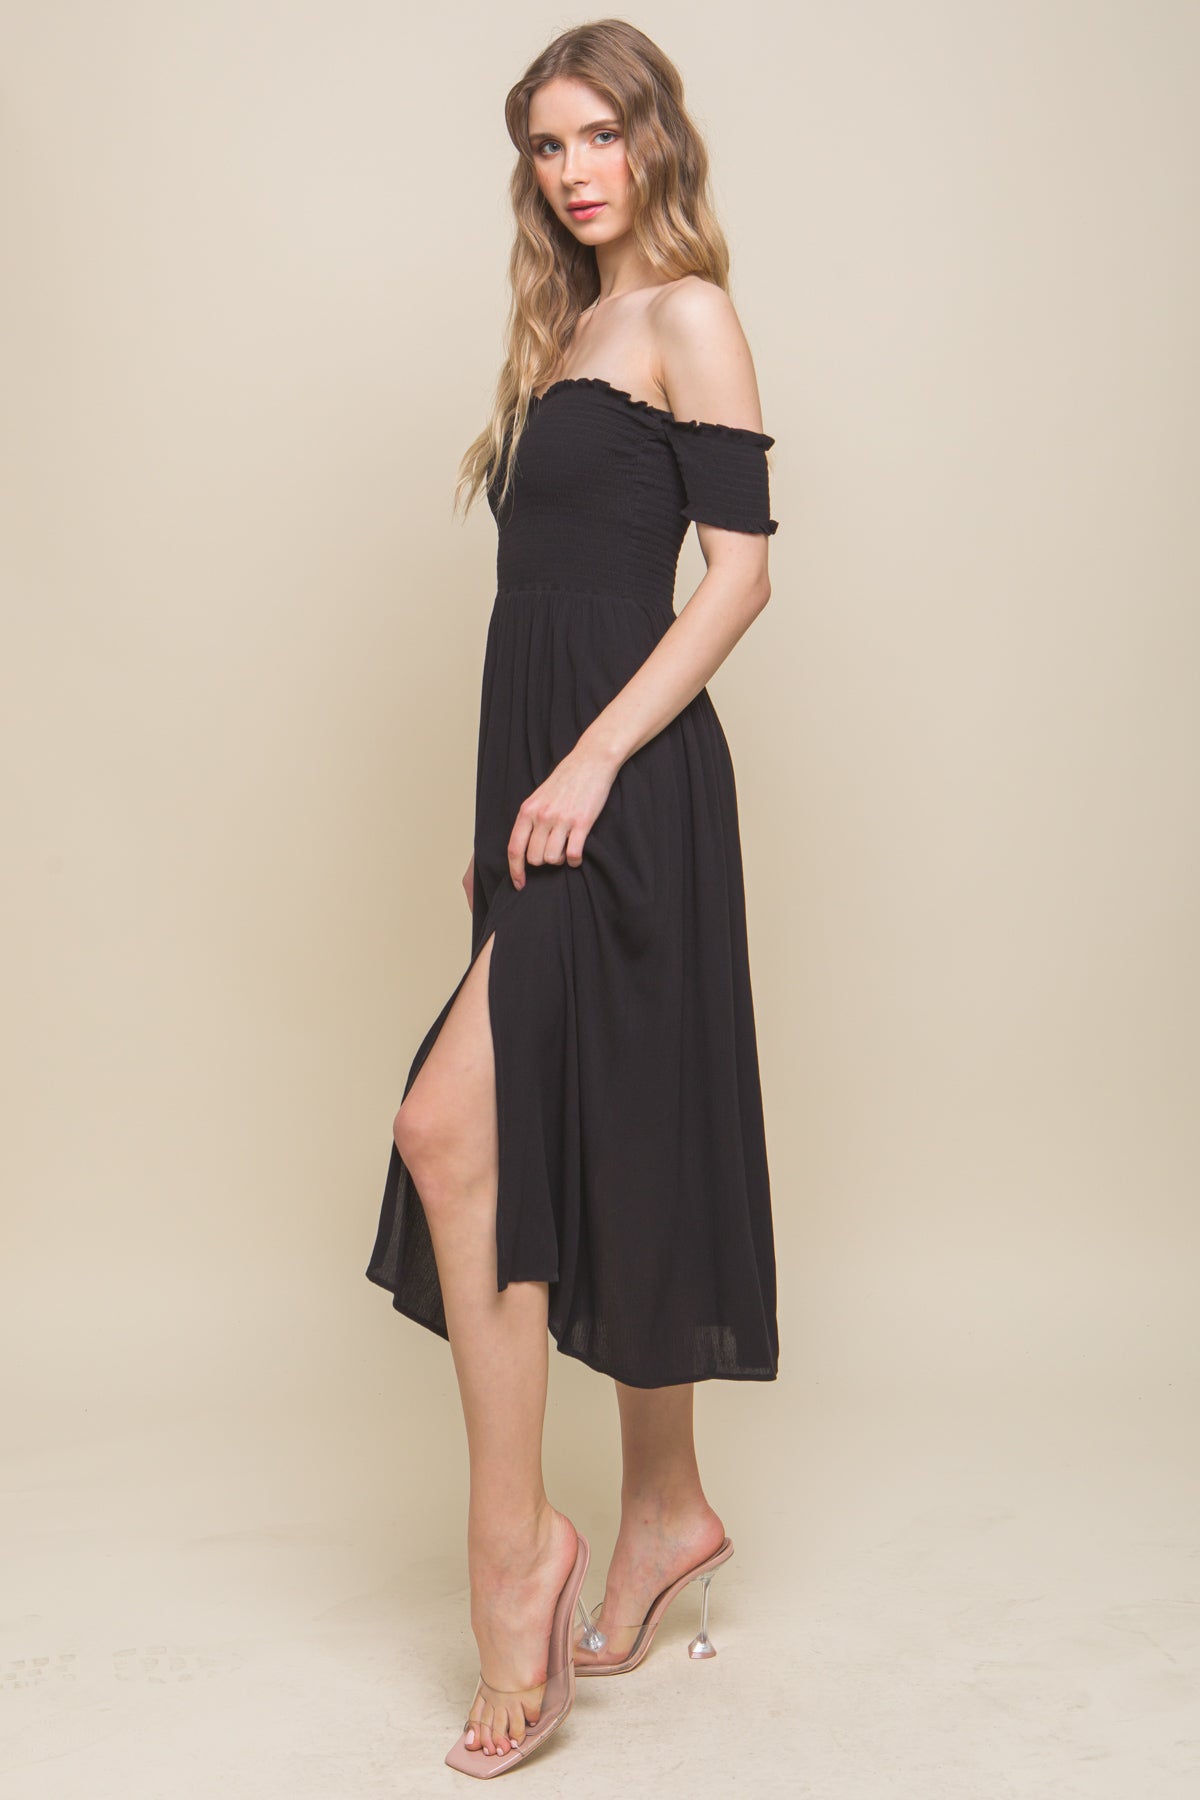 Flowy Off The Shoulder Dress - 6 colors - Ships from The USA - women's dress at TFC&H Co.